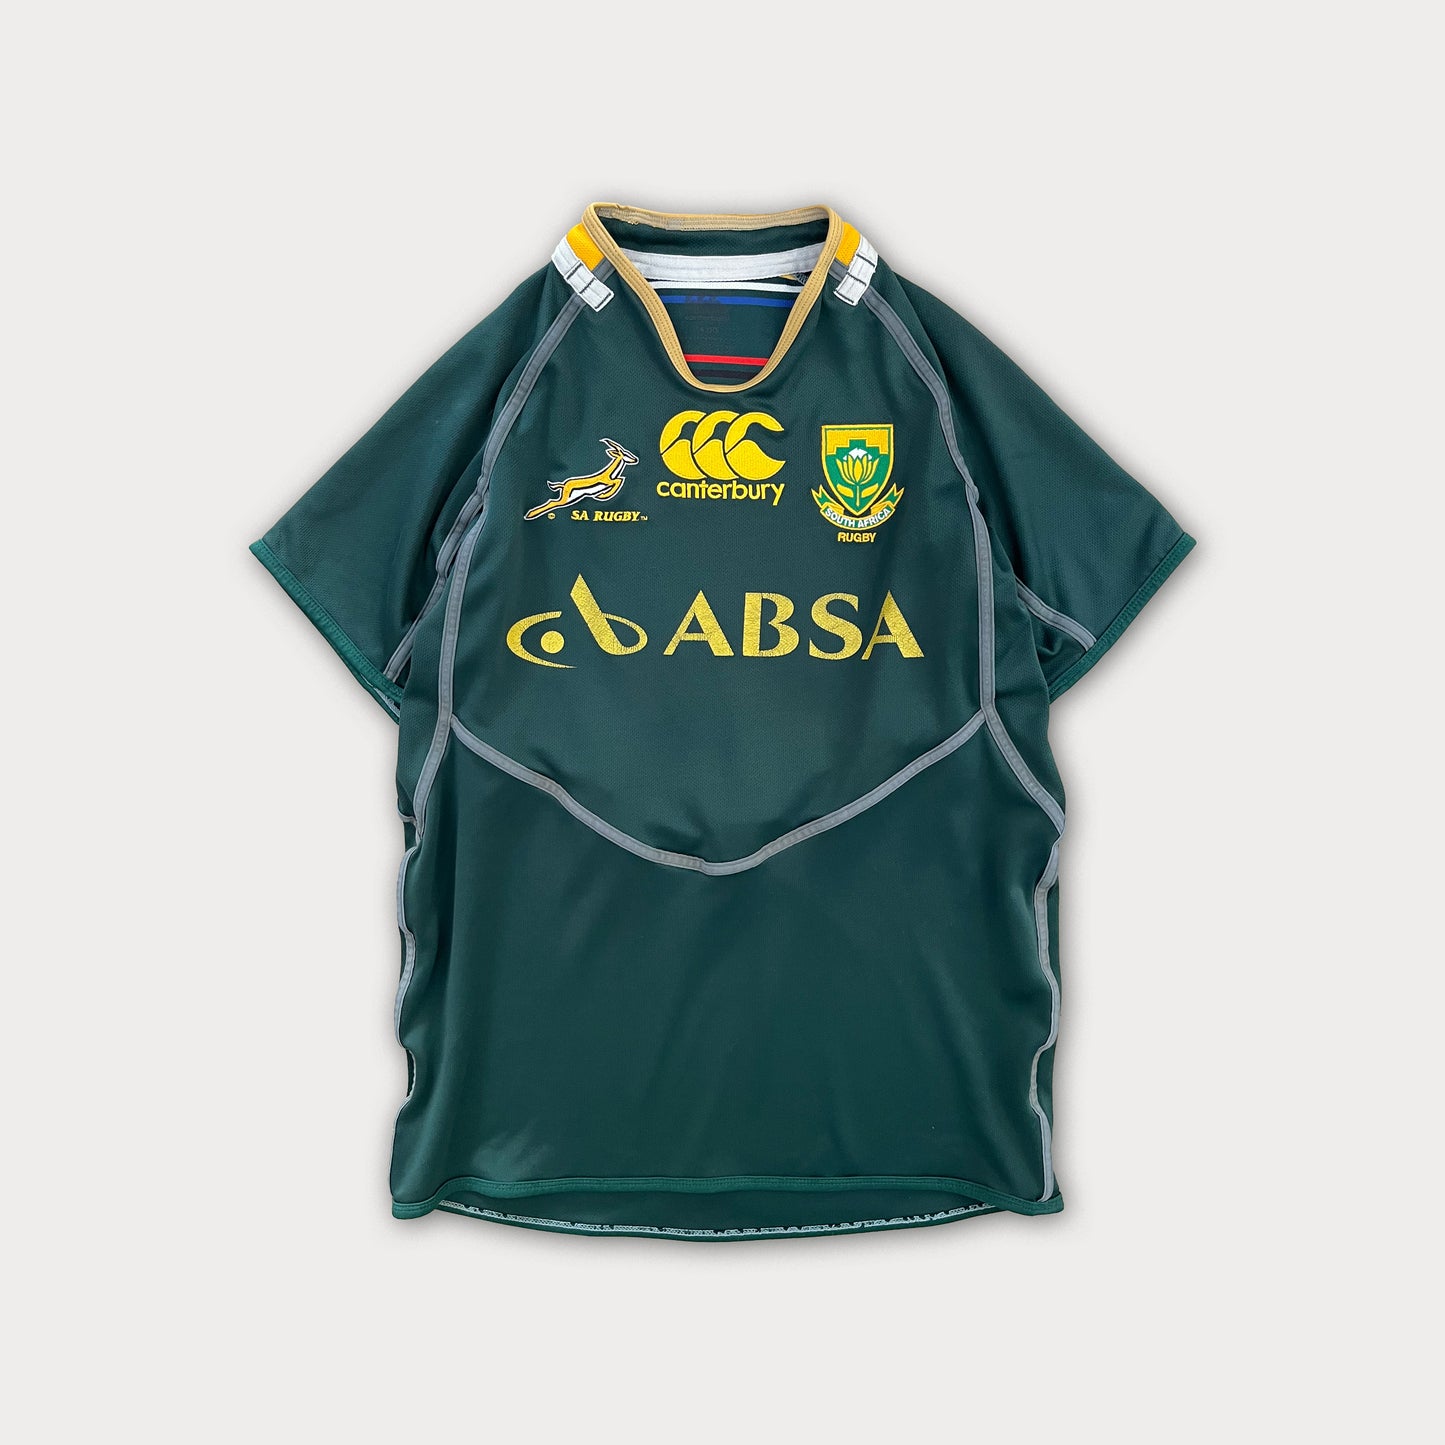 2011 South Africa Rugby